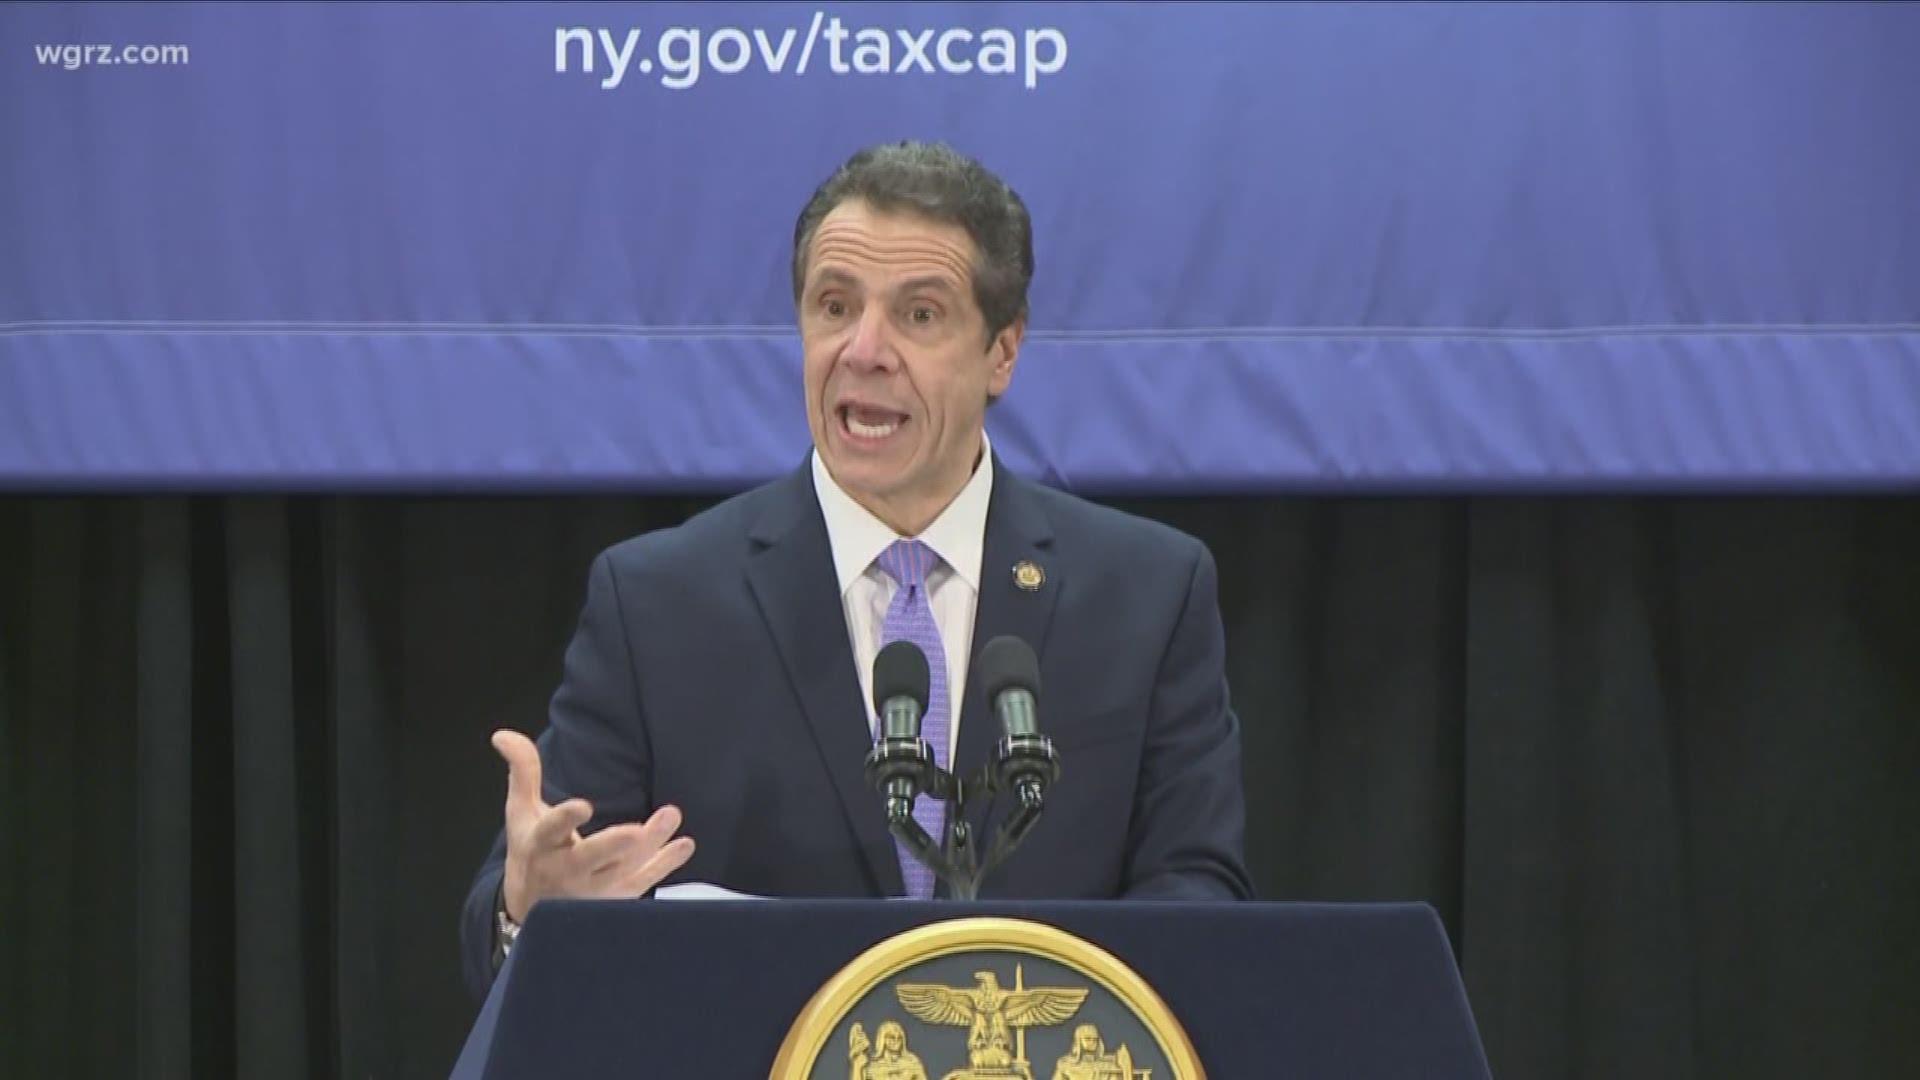 Governor Cuomo and state leaders reached a budget deal early on Sunday.